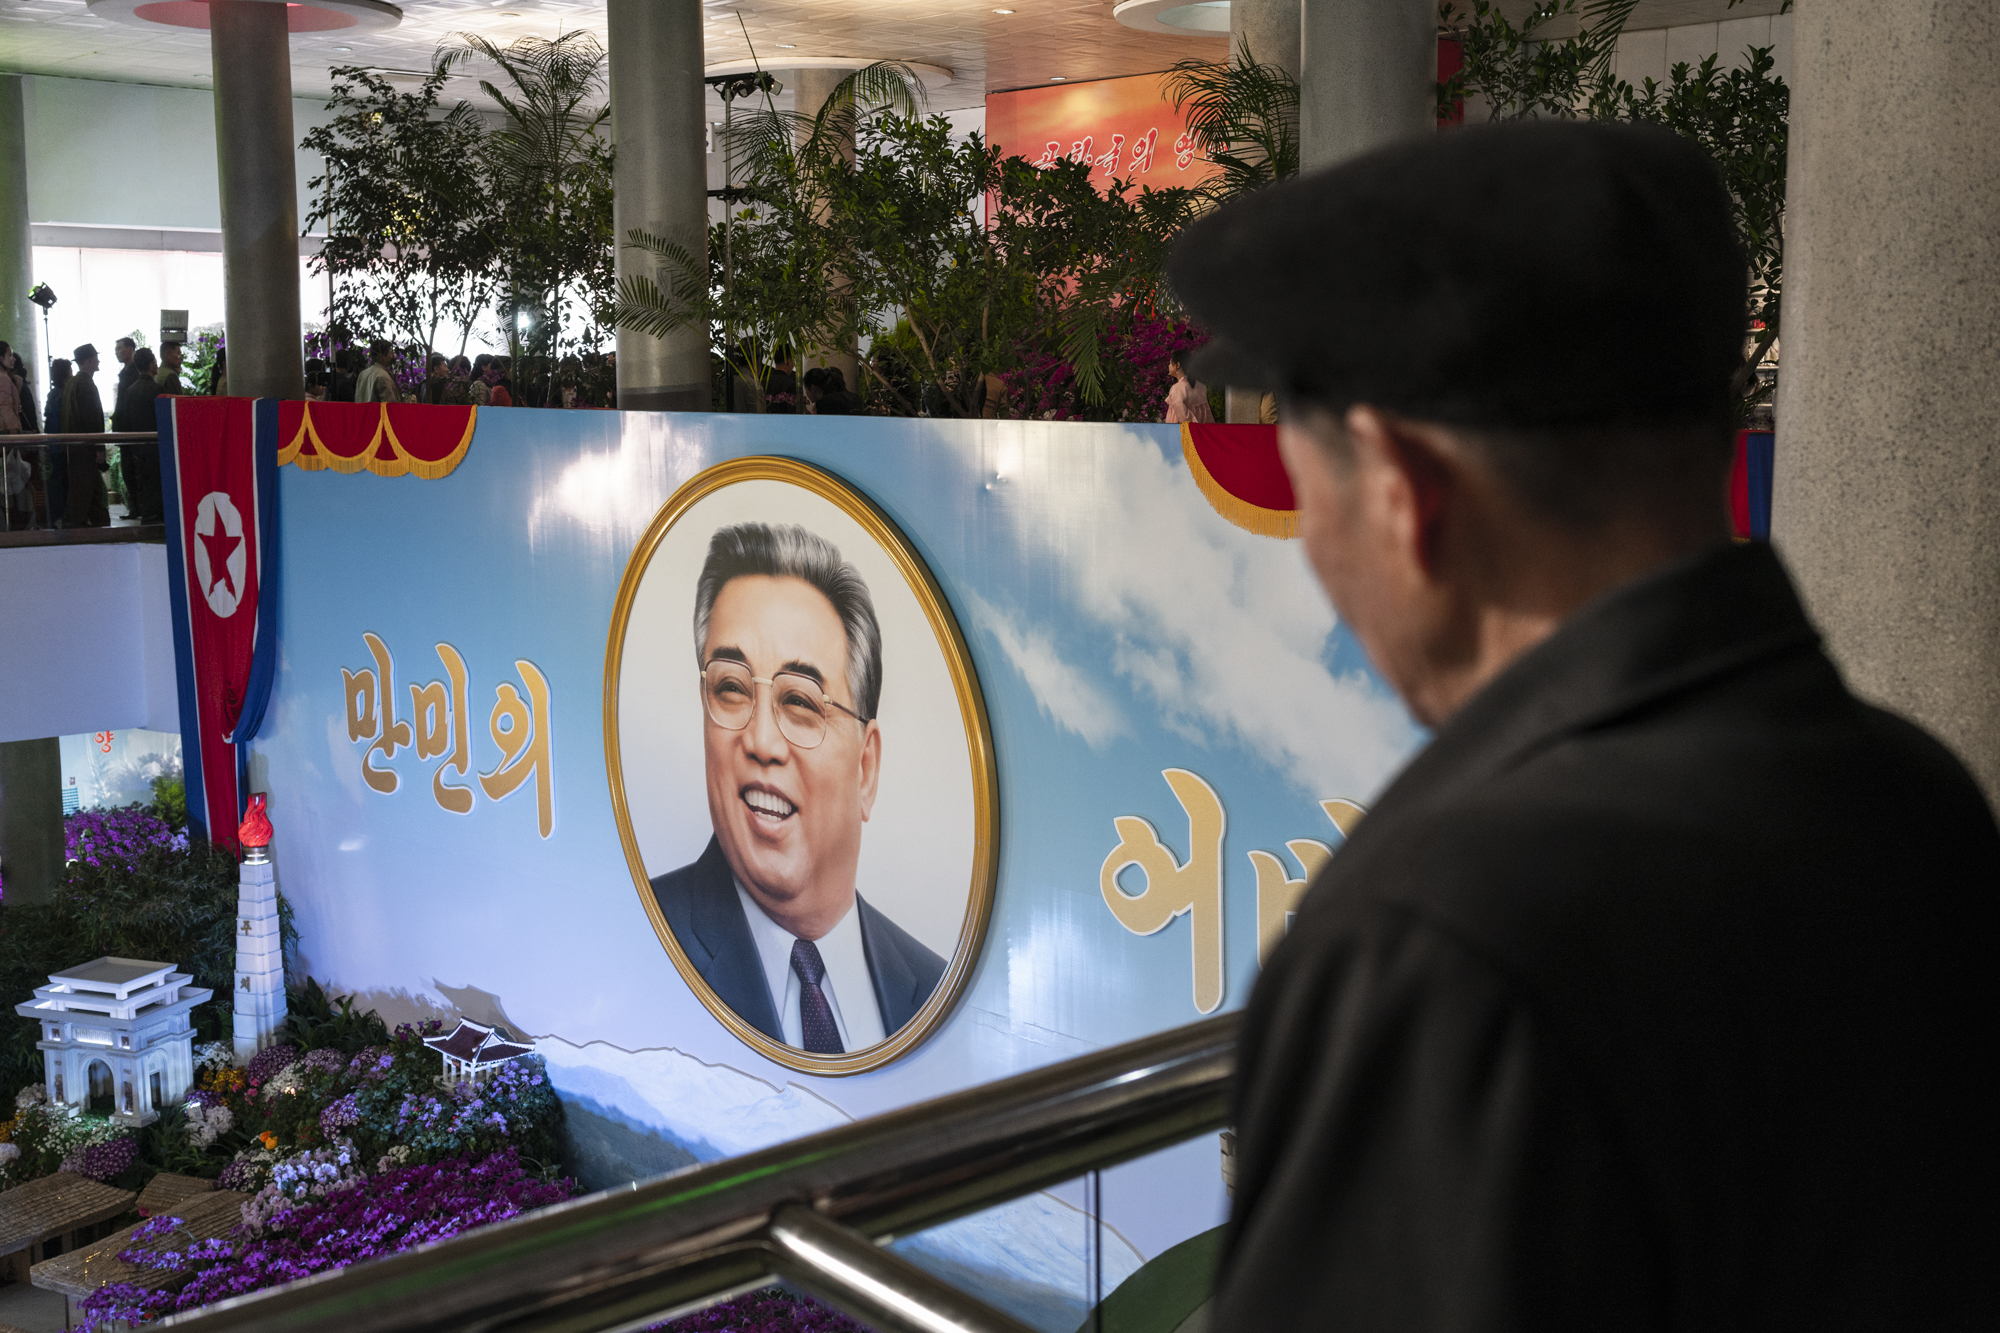  On the birthday anniversary of the former Leader Kim Il Sung , on April 15, North Koreans pay tributes visiting the Kimilsungia and Kimjongilia Flower Exhibition Hall in Pyongyang, two flowers named after Kim Il Sung and Kim Jong Il respectively. 